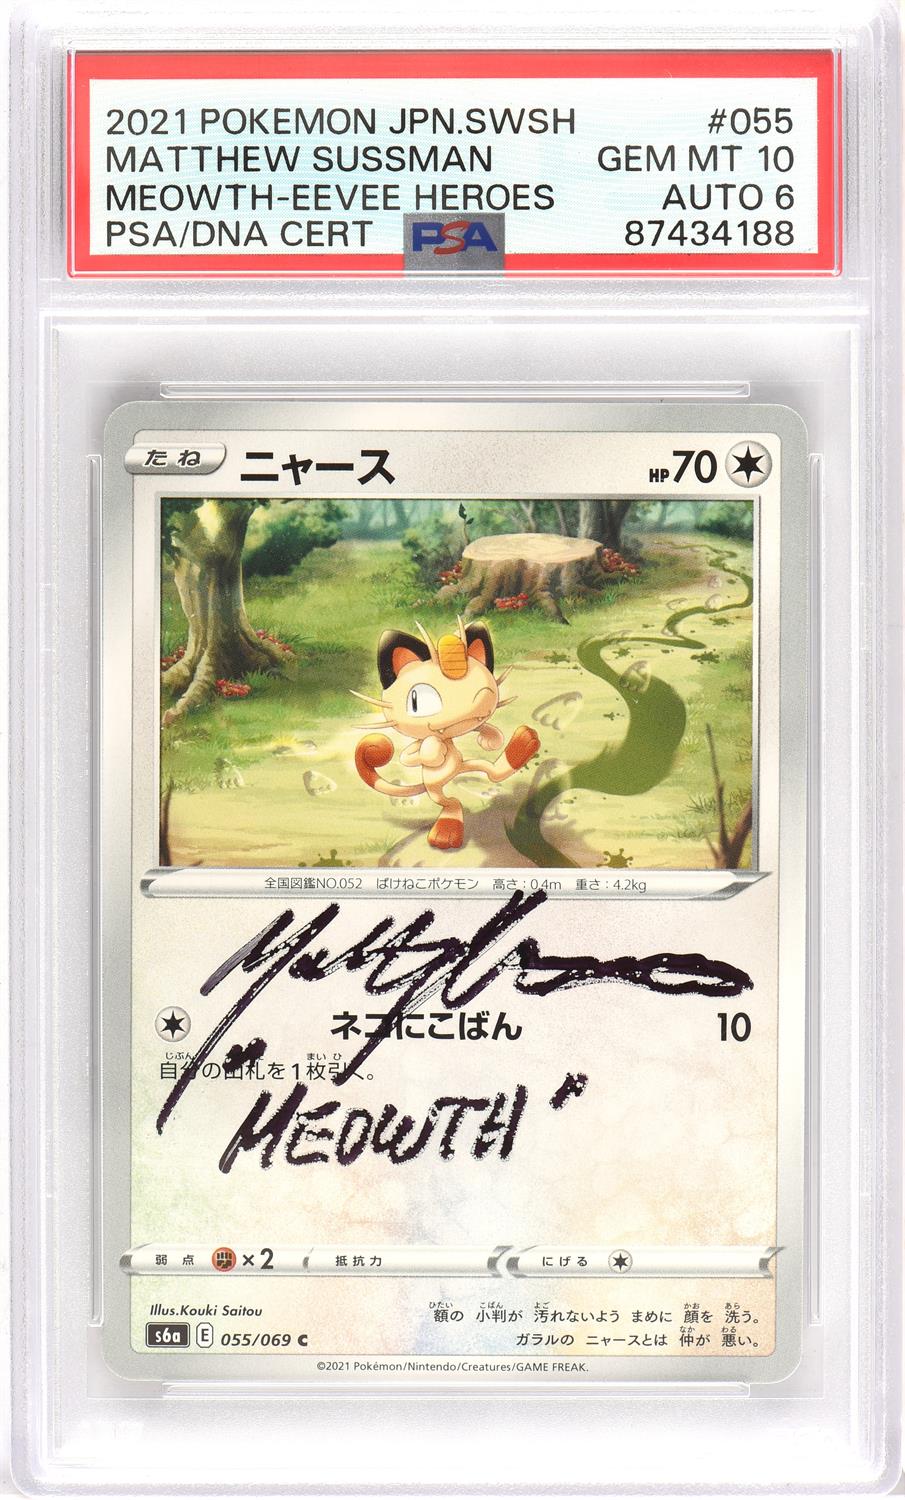 Pokemon TCG. Meowth Japanese Eevee Heroes 055/069 Signed by Matthew Sussman who voiced Meowth in